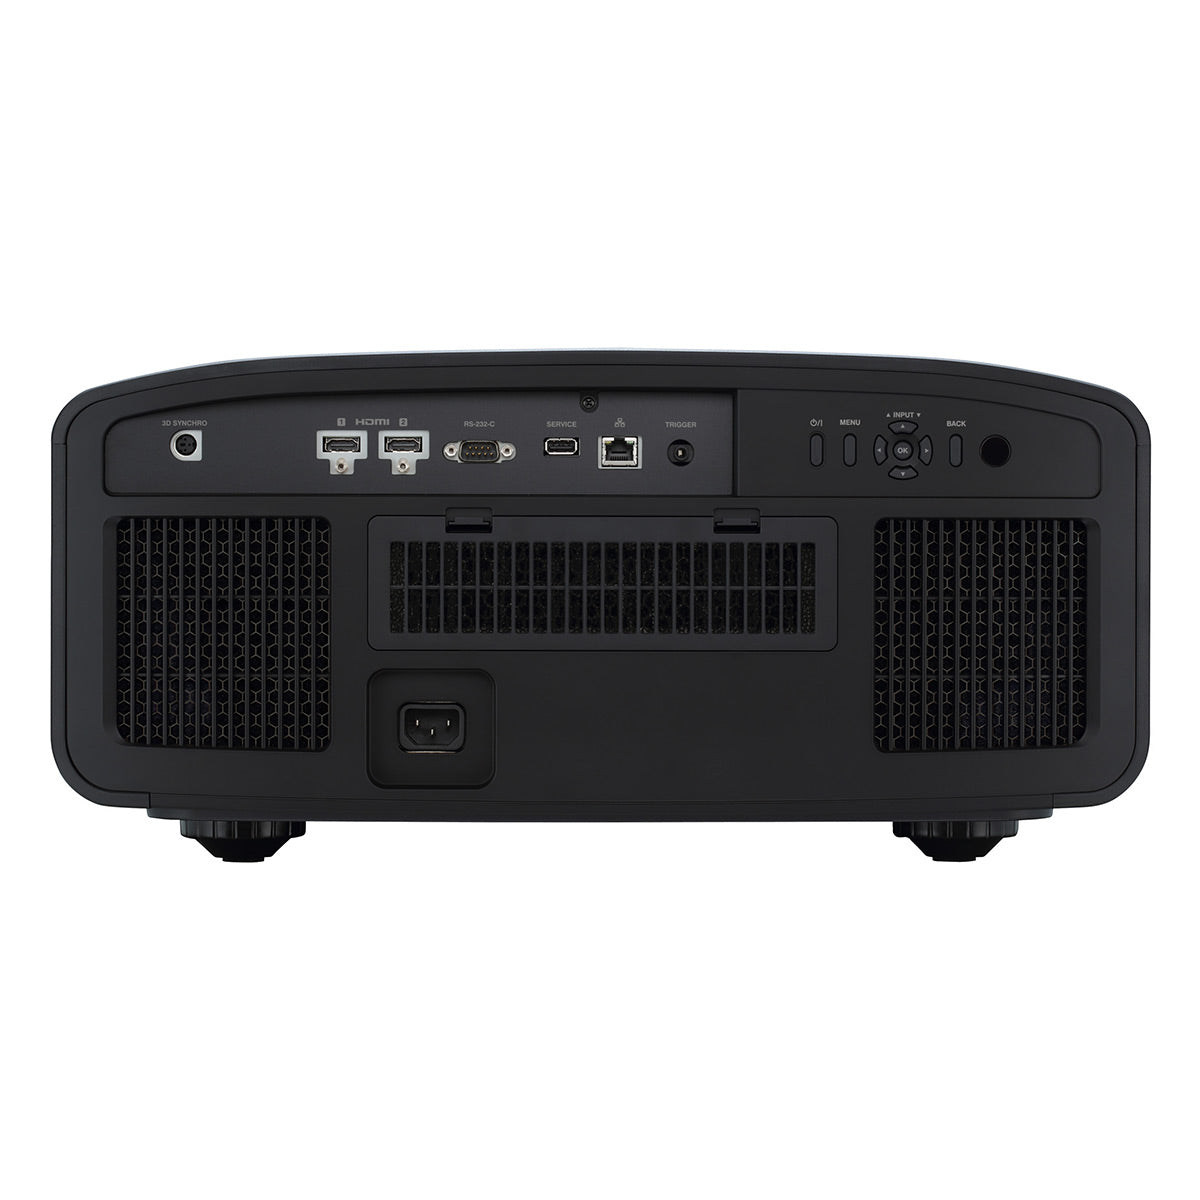 JVC DLA-NP5 D-ILA Native 4K Home Theater Projector with HDR 10+, Auto Calibration, Low Latency, & Filmmaker Mode